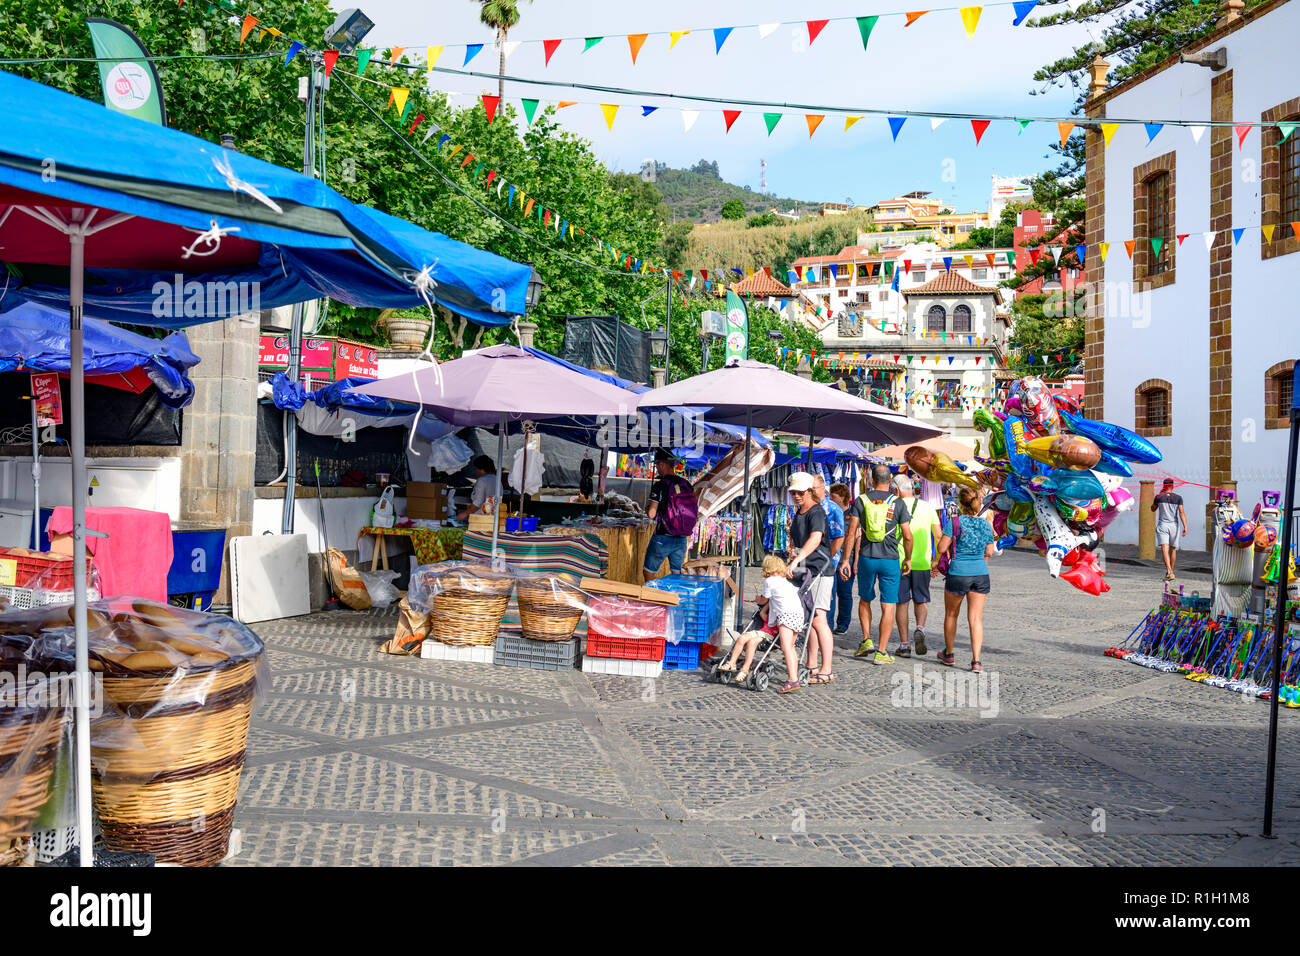 Locals and tourists mix in the maket at Teror, Gran Canaria, Canary Islands Stock Photo